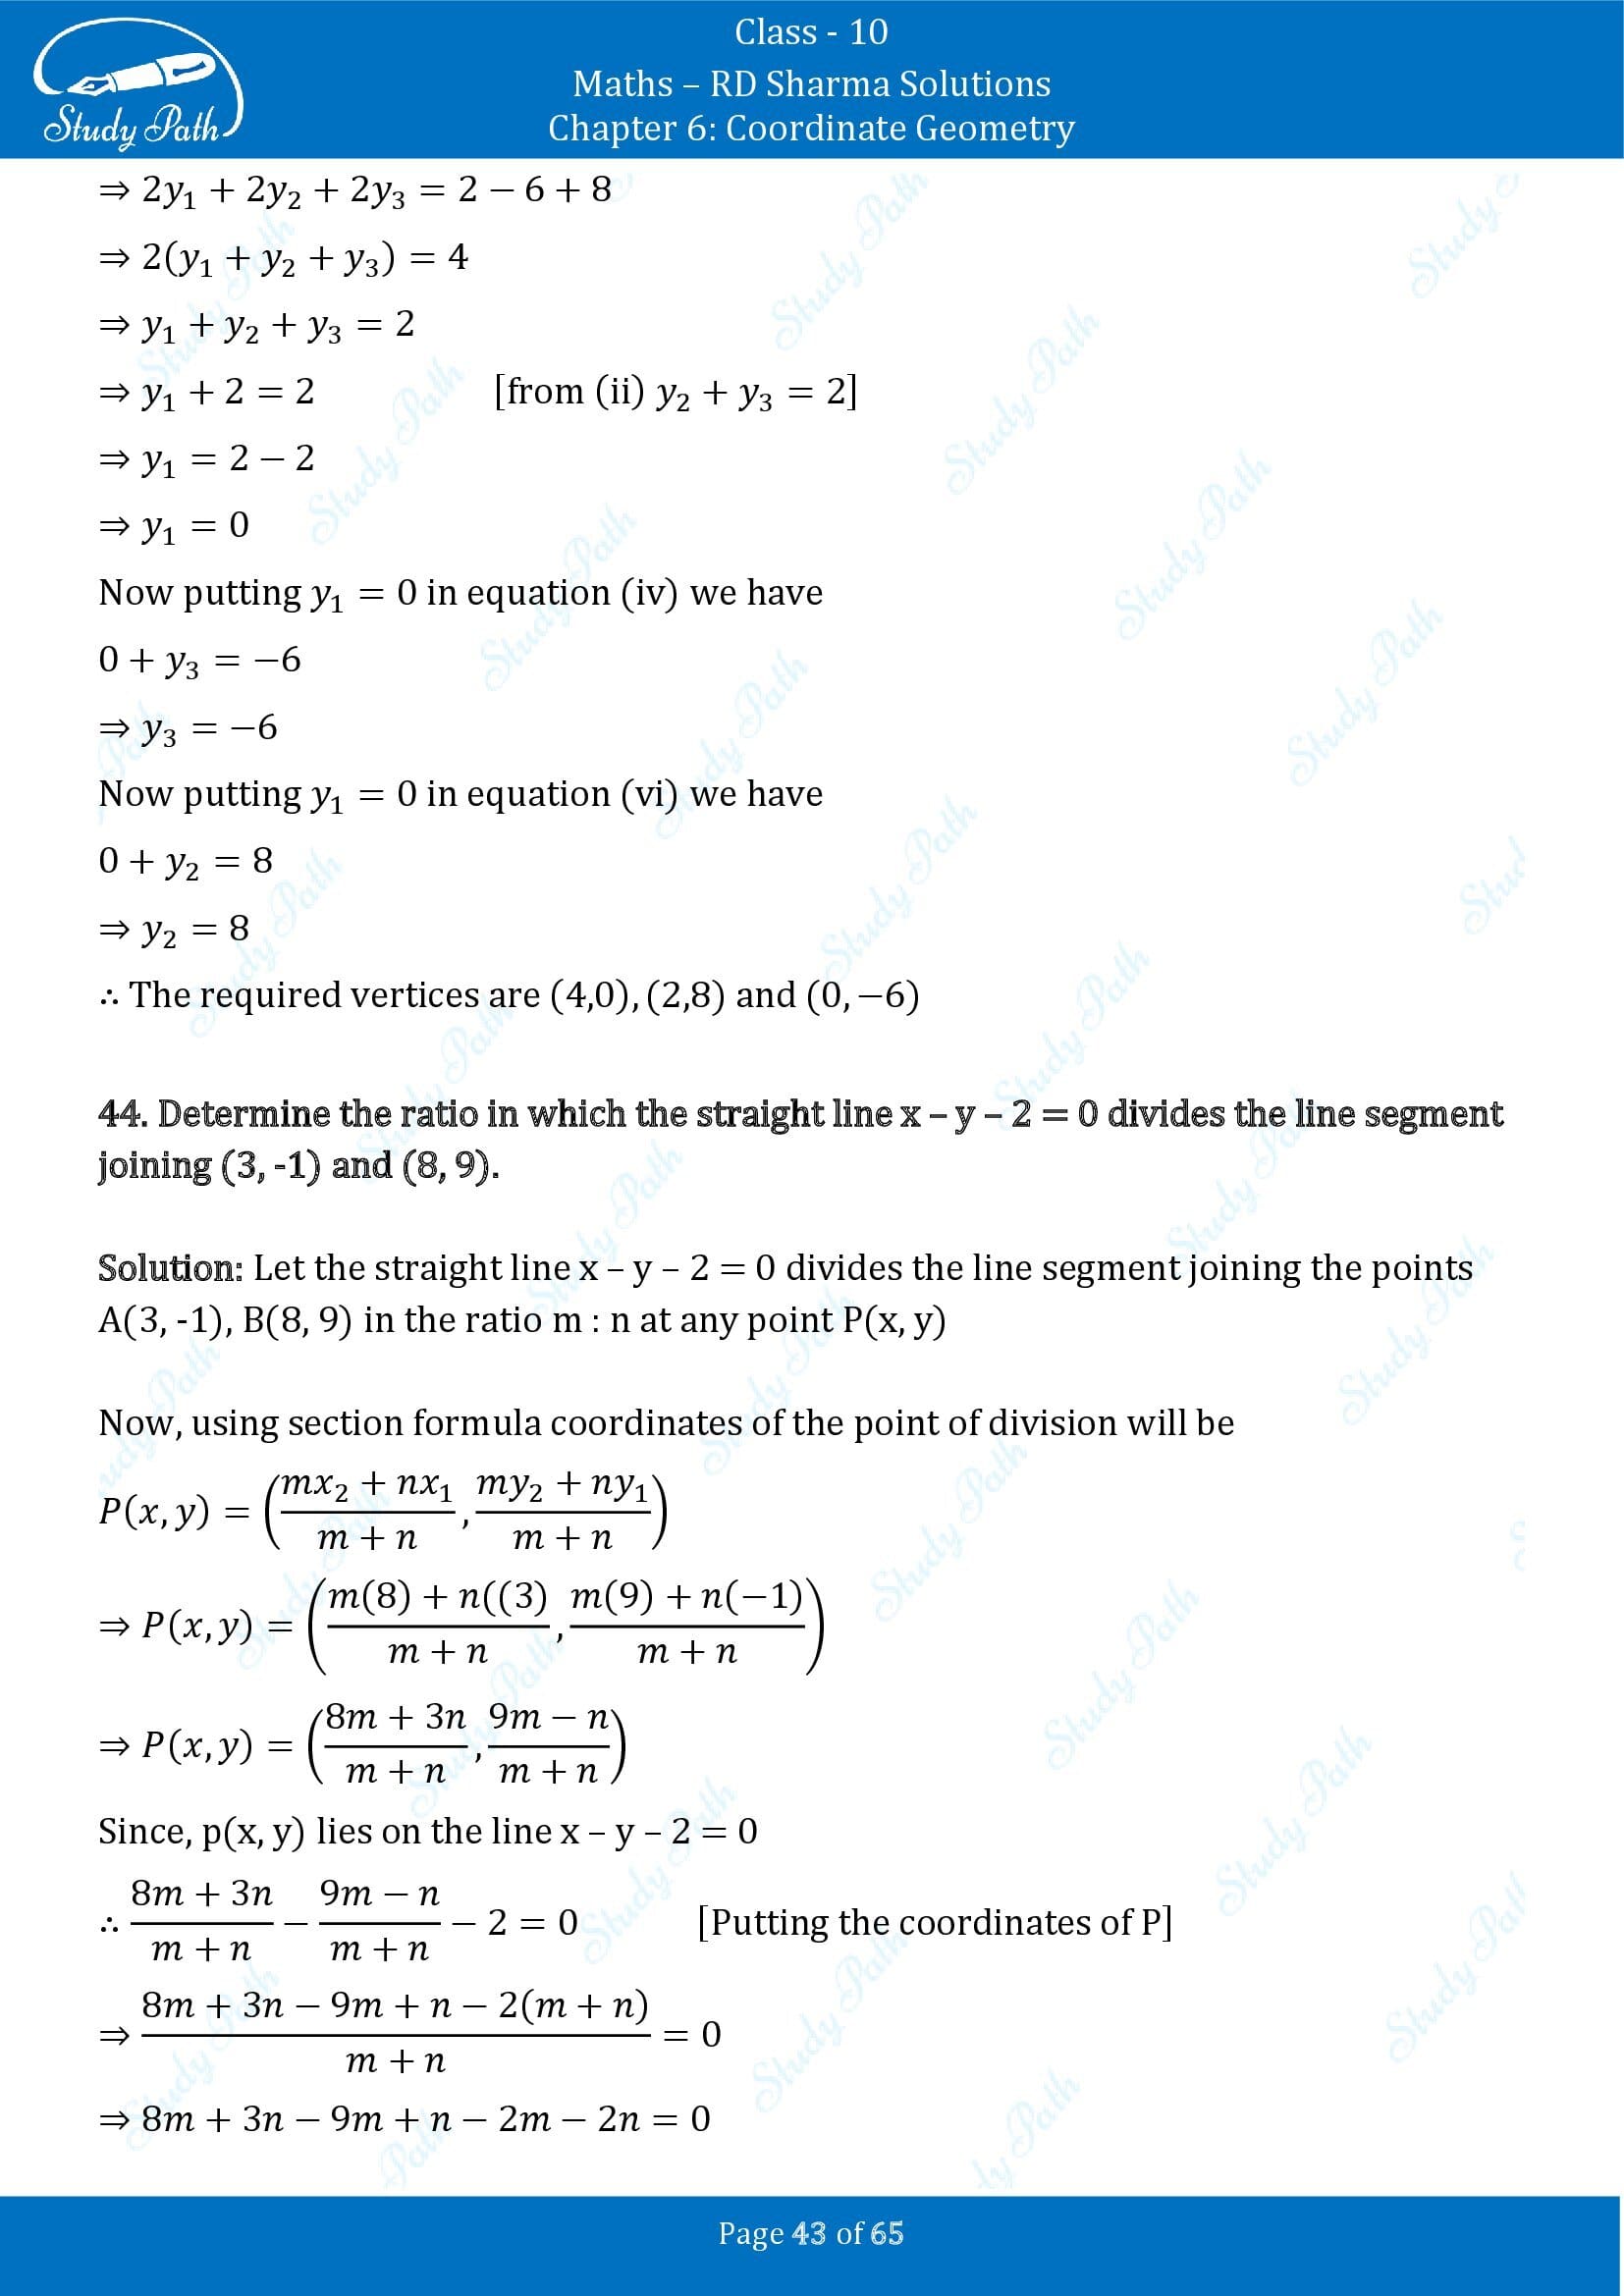 RD Sharma Solutions Class 10 Chapter 6 Coordinate Geometry Exercise 6.3 00043